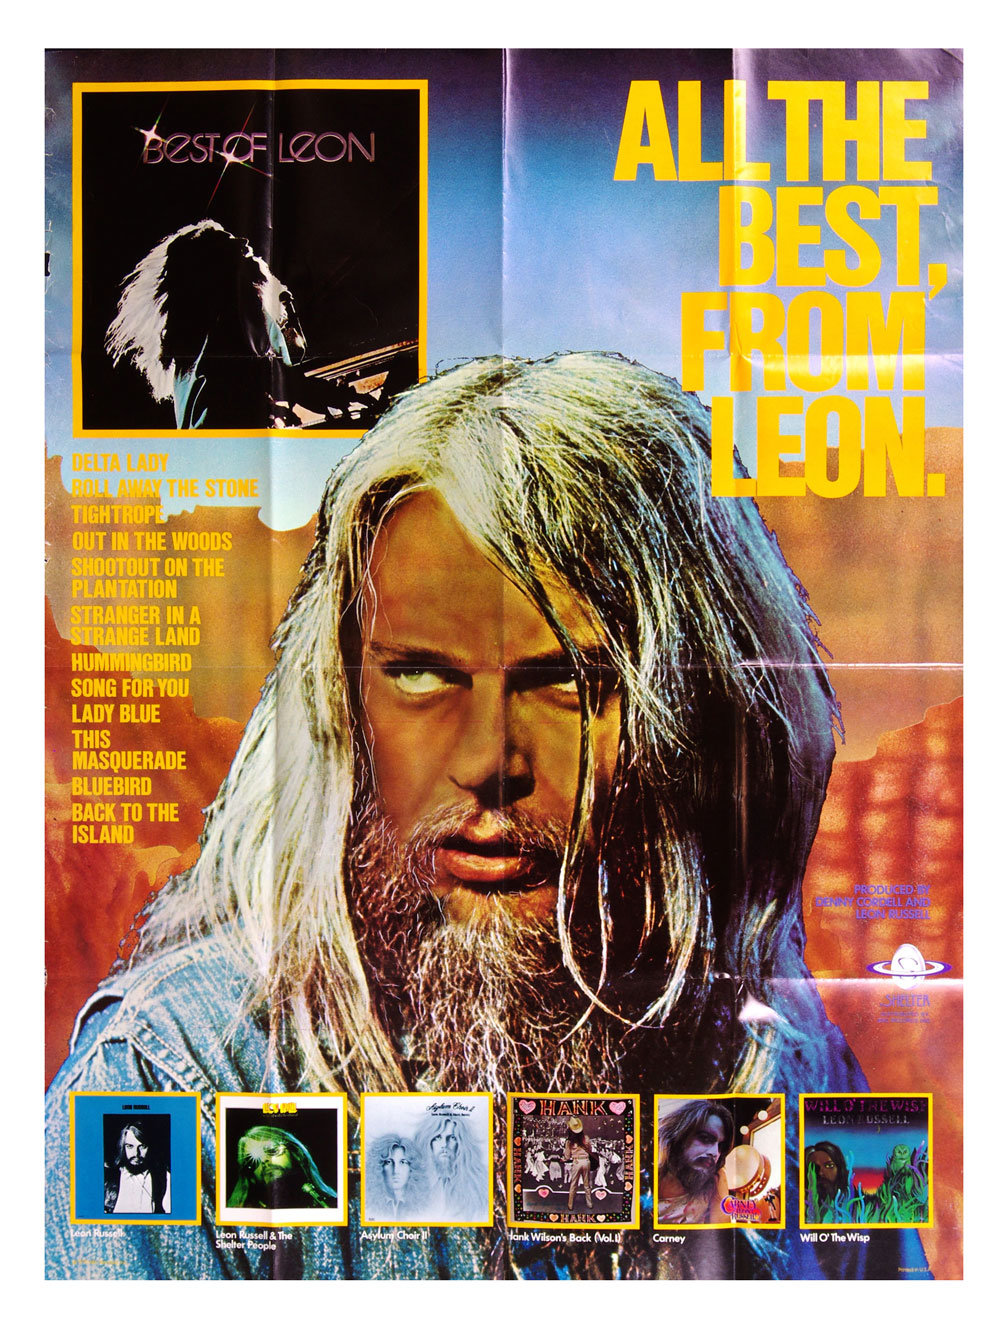 Leon Russell Poster 1976 Best of Leon Album Promotion